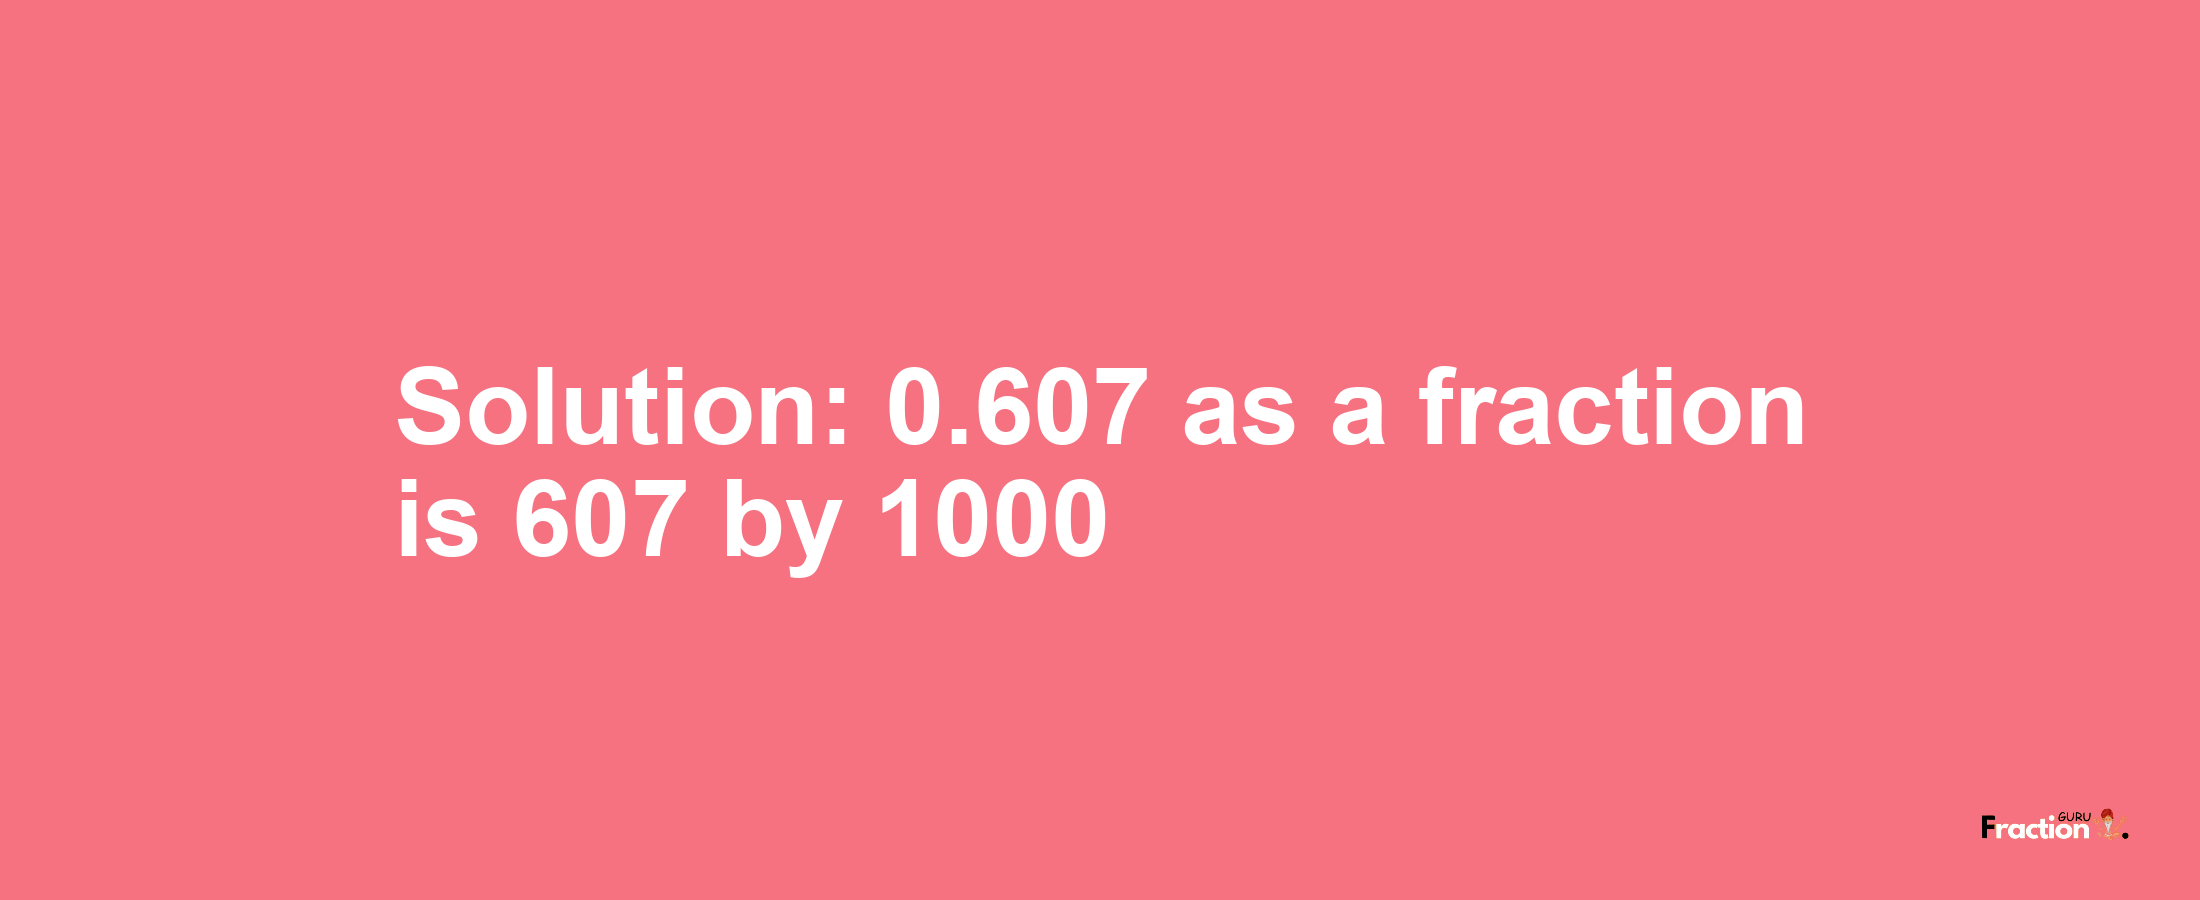 Solution:0.607 as a fraction is 607/1000